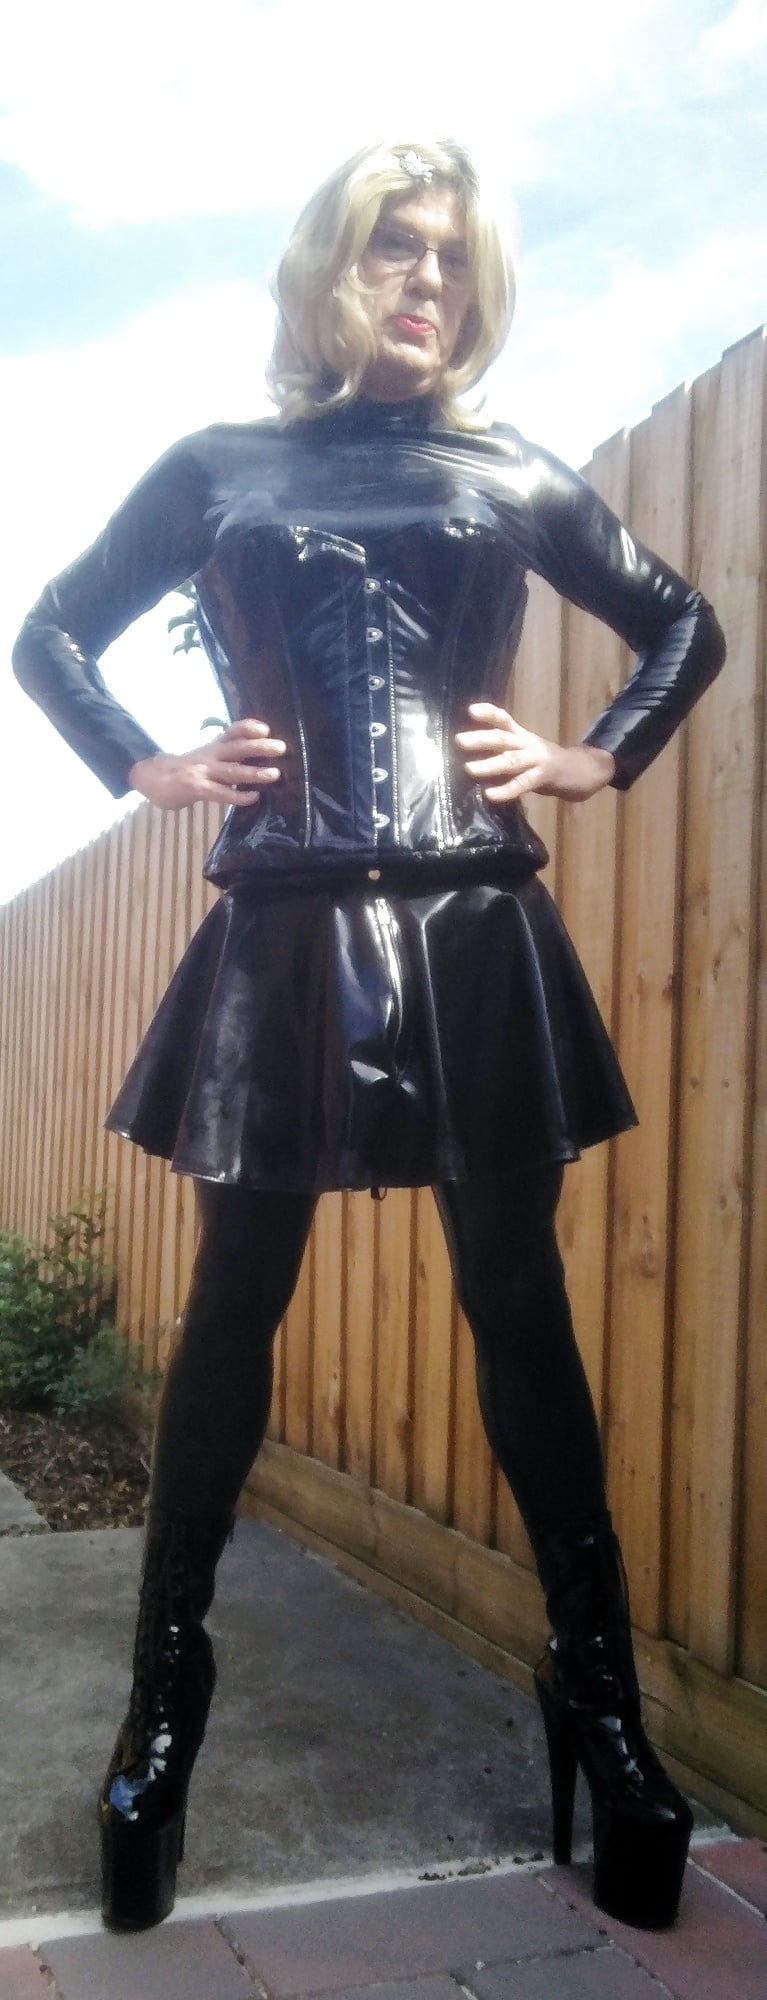 Warm day for latex #107273685